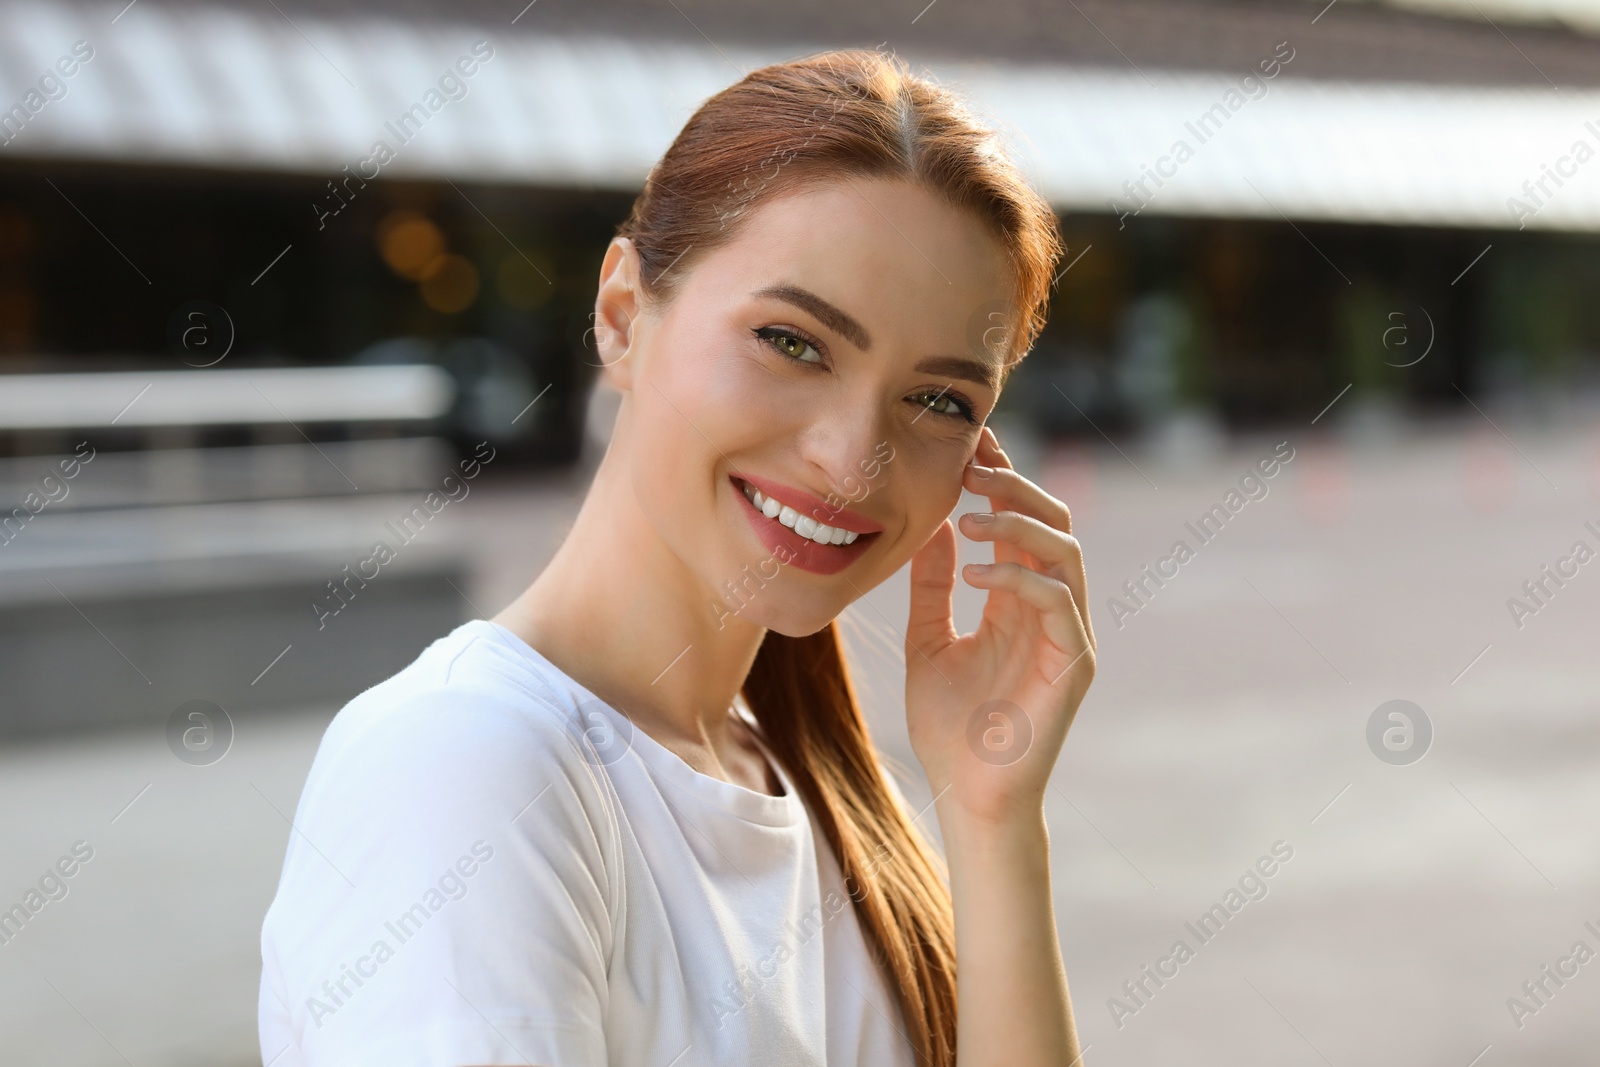 Photo of Portrait of happy young woman in casual clothes outdoors. Attractive lady smiling and looking into camera